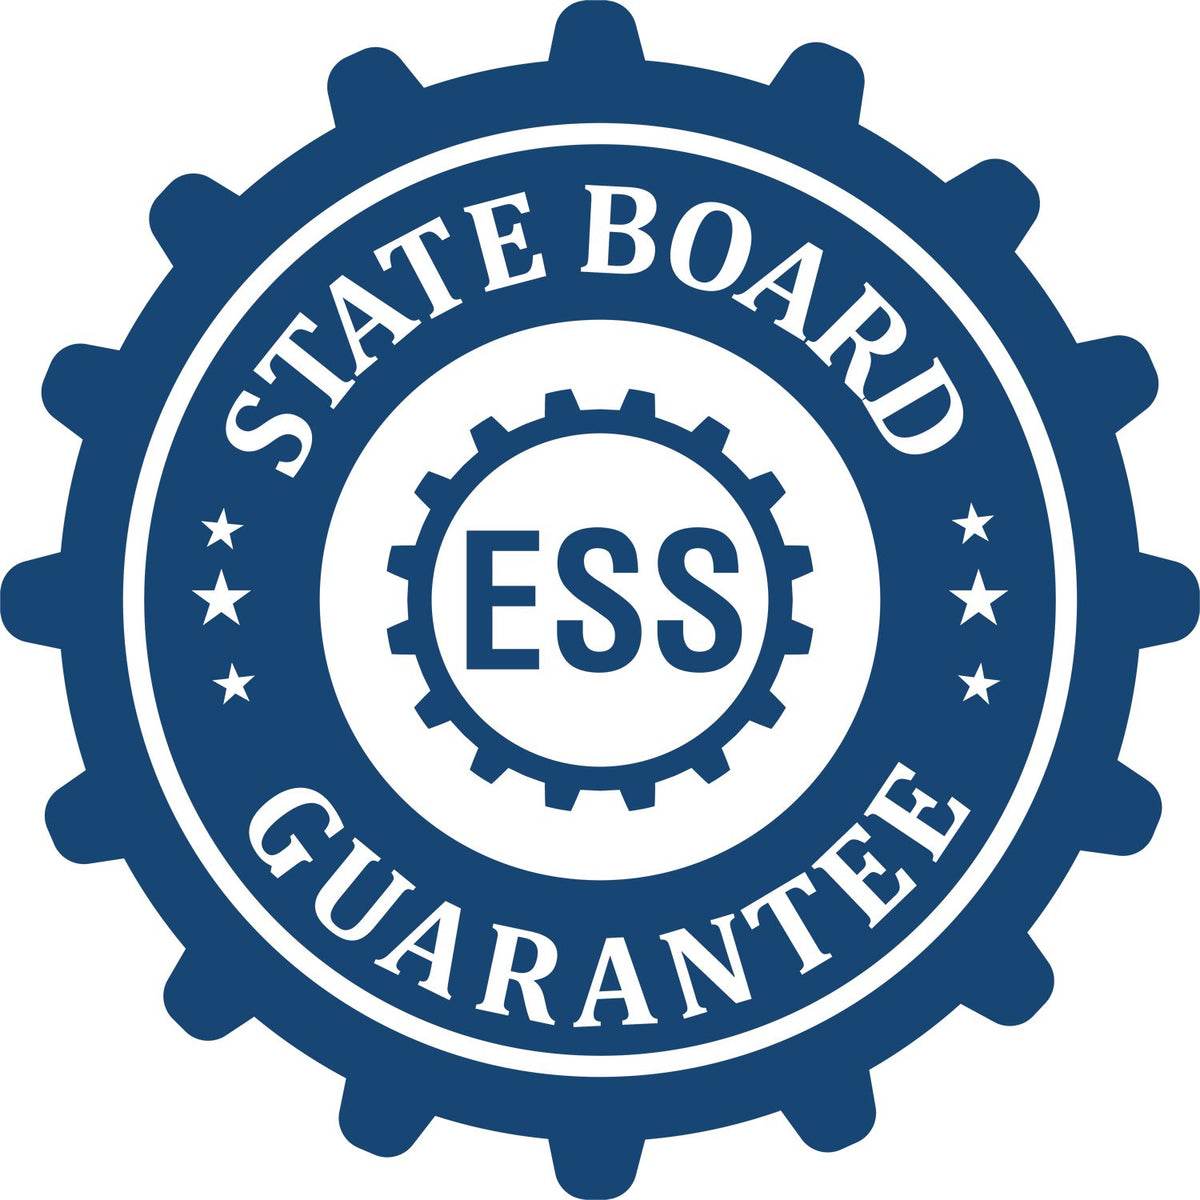 An emblem in a gear shape illustrating a state board guarantee for the Digital Texas Geologist Stamp, Electronic Seal for Texas Geologist